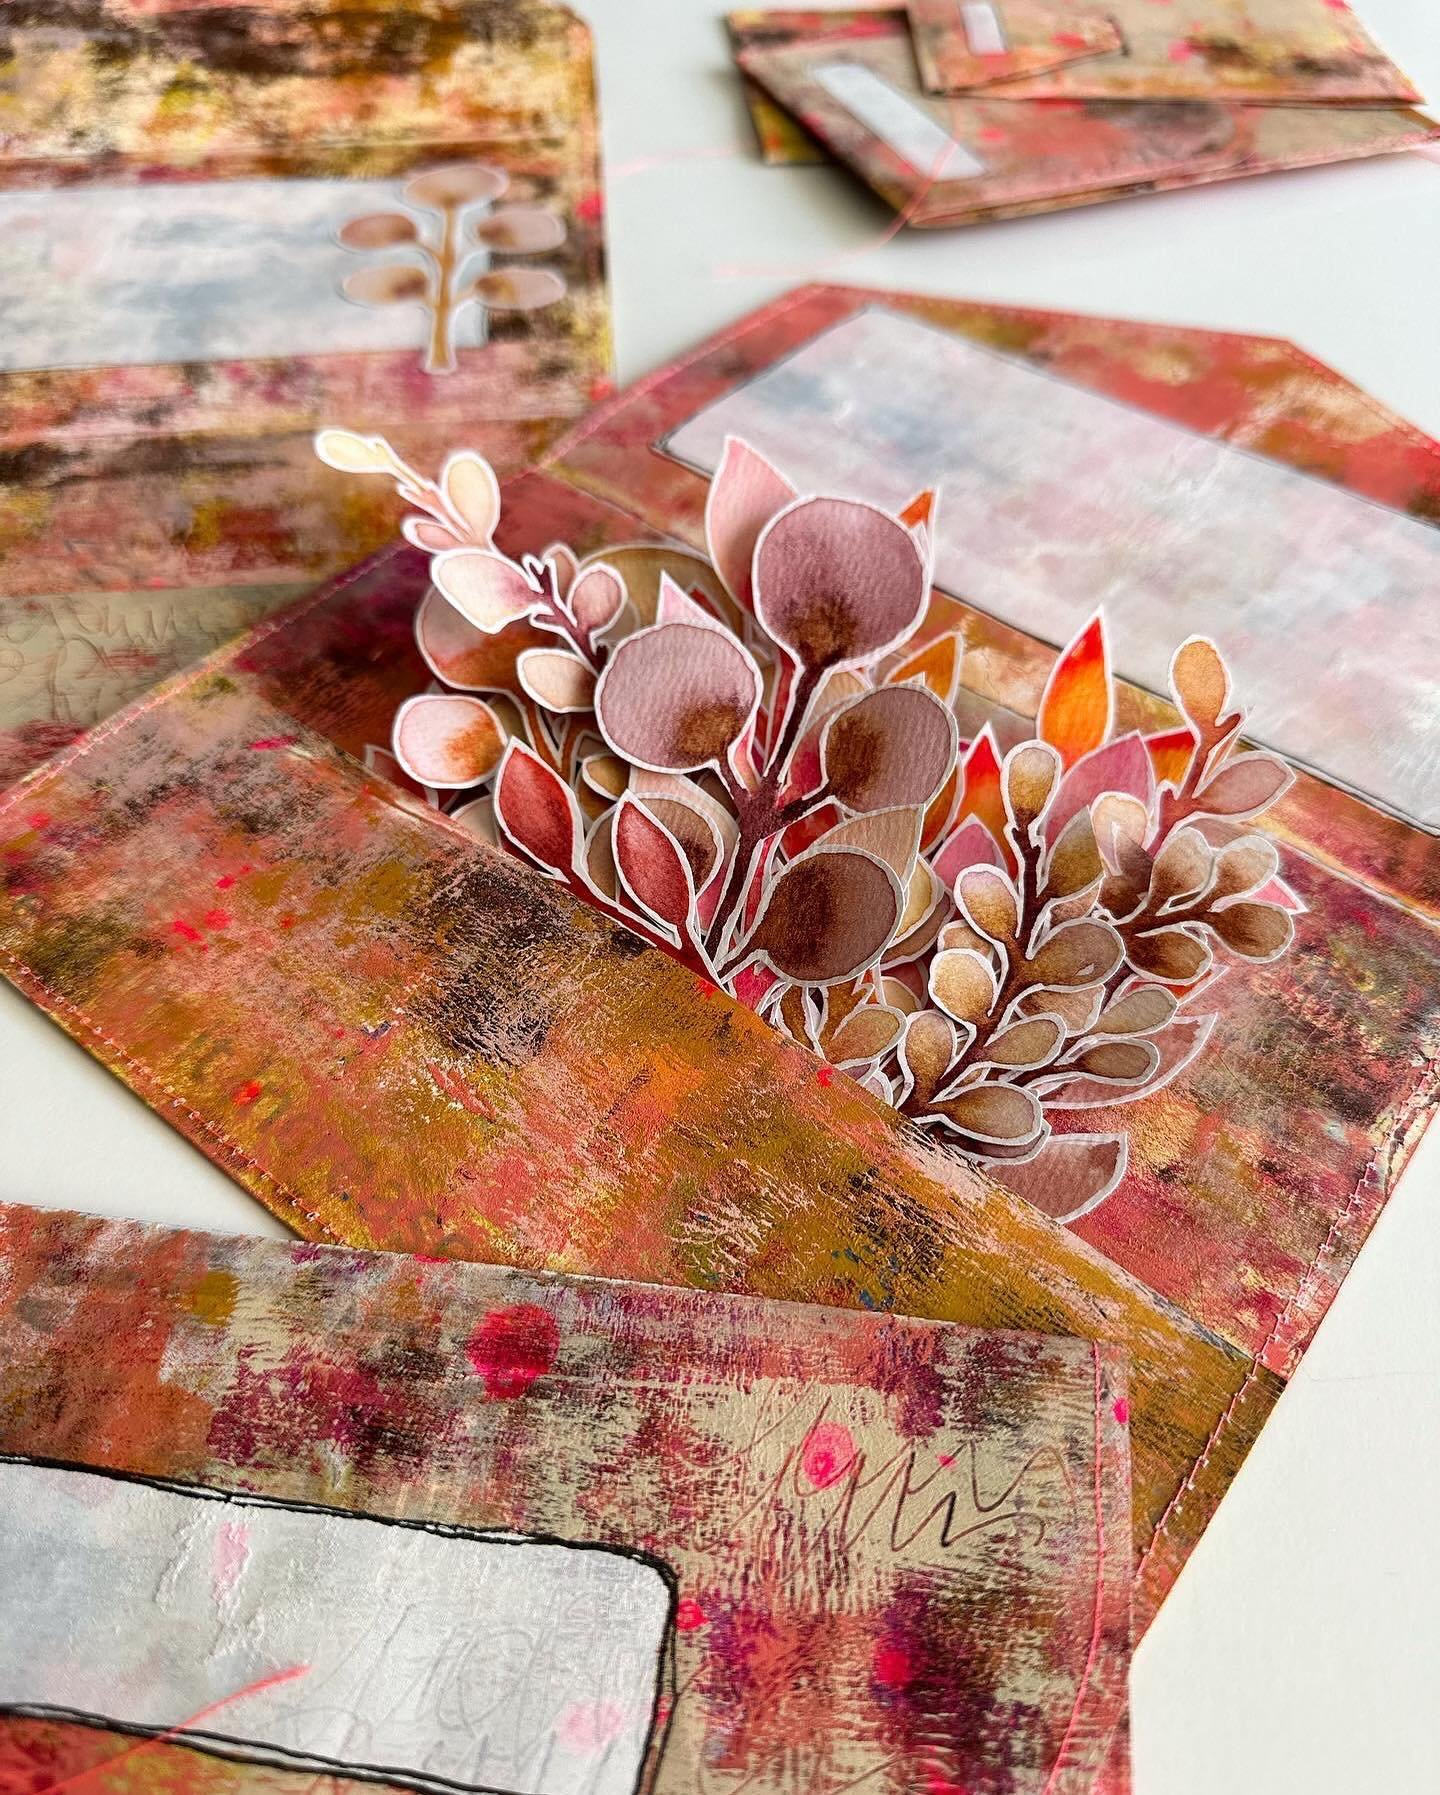 Throwback to November Fodder School 3 lessons with Tiffany Sharpe @tiffanysimplysharpe. I&rsquo;m still obsessed with this color palette that has been developing for me ever since September of FS2 with @juliehamiltoncreative. 

Everything about Tiffa